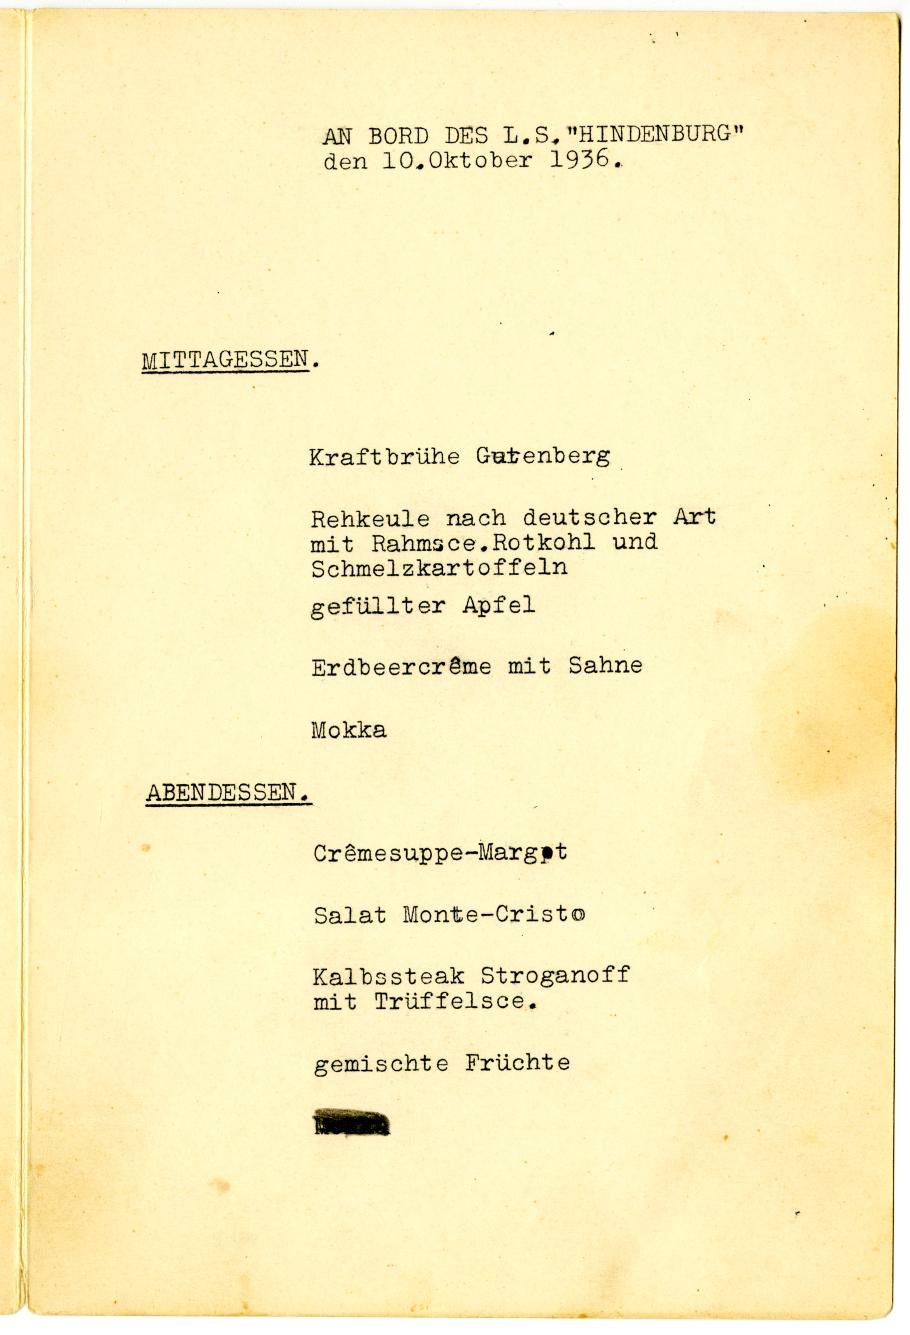 A manilla page with German writing on it.